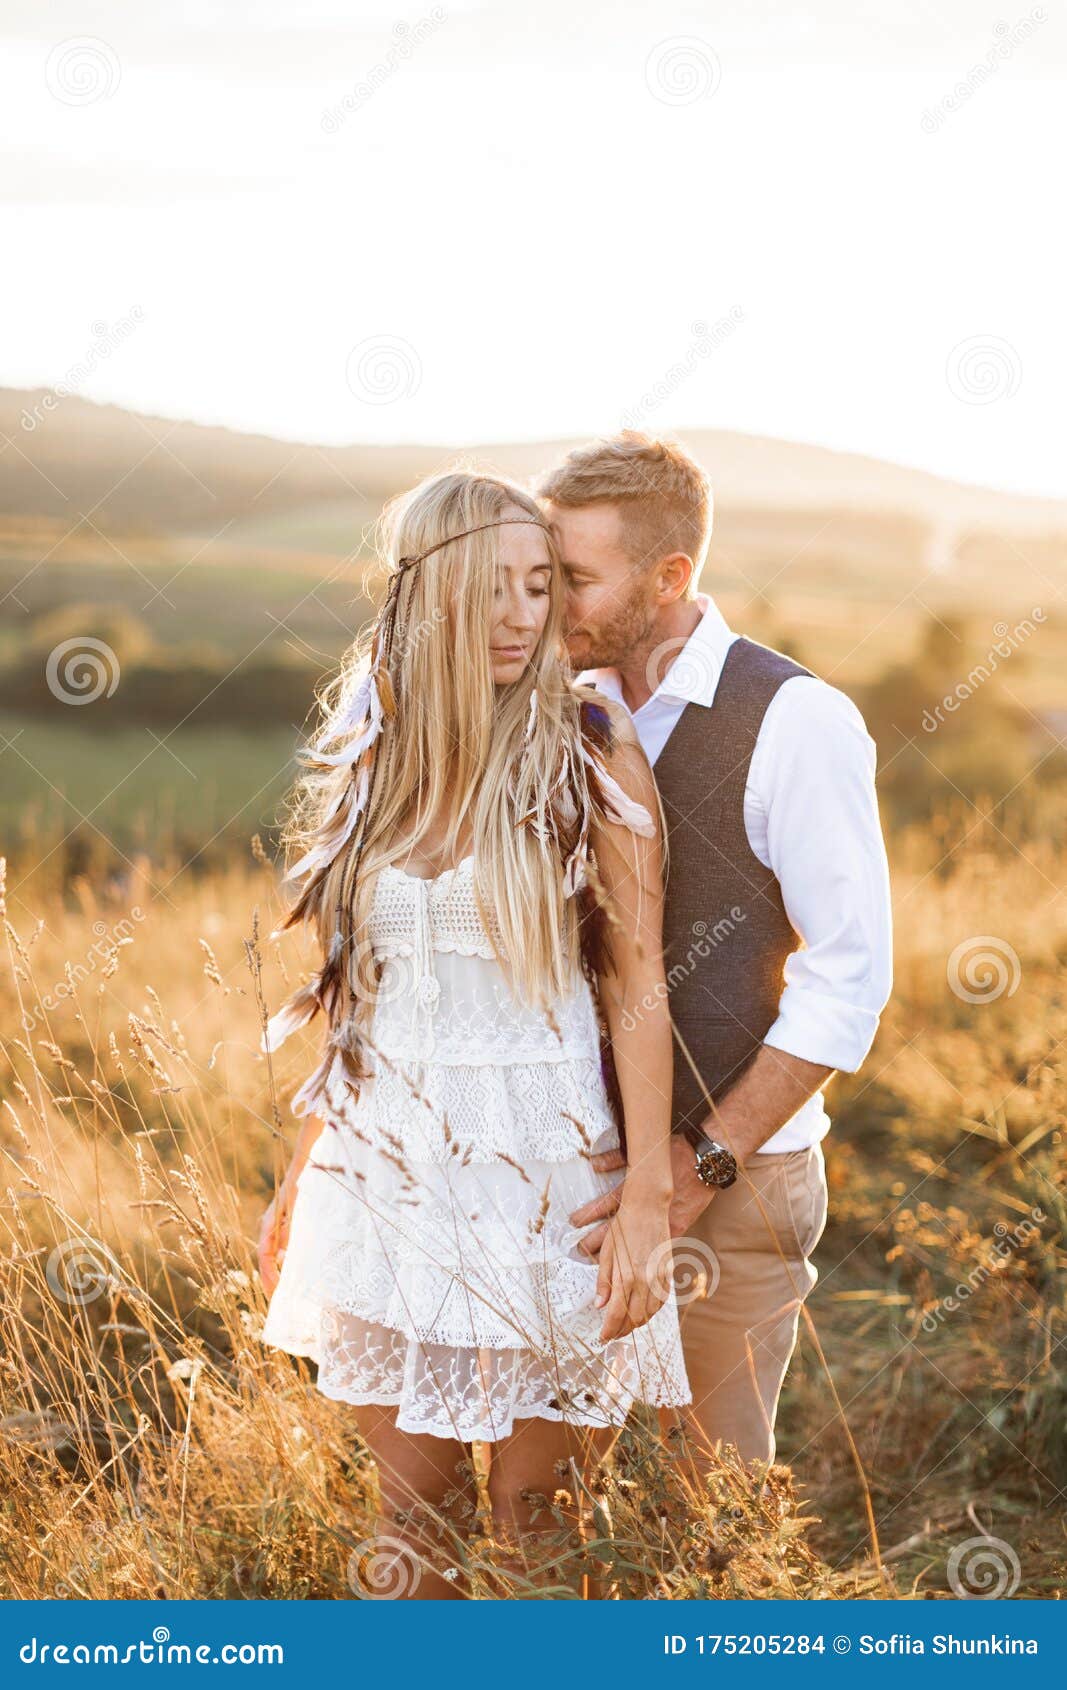 Boho Couple Holding Hands And Embracing Together, Walking In